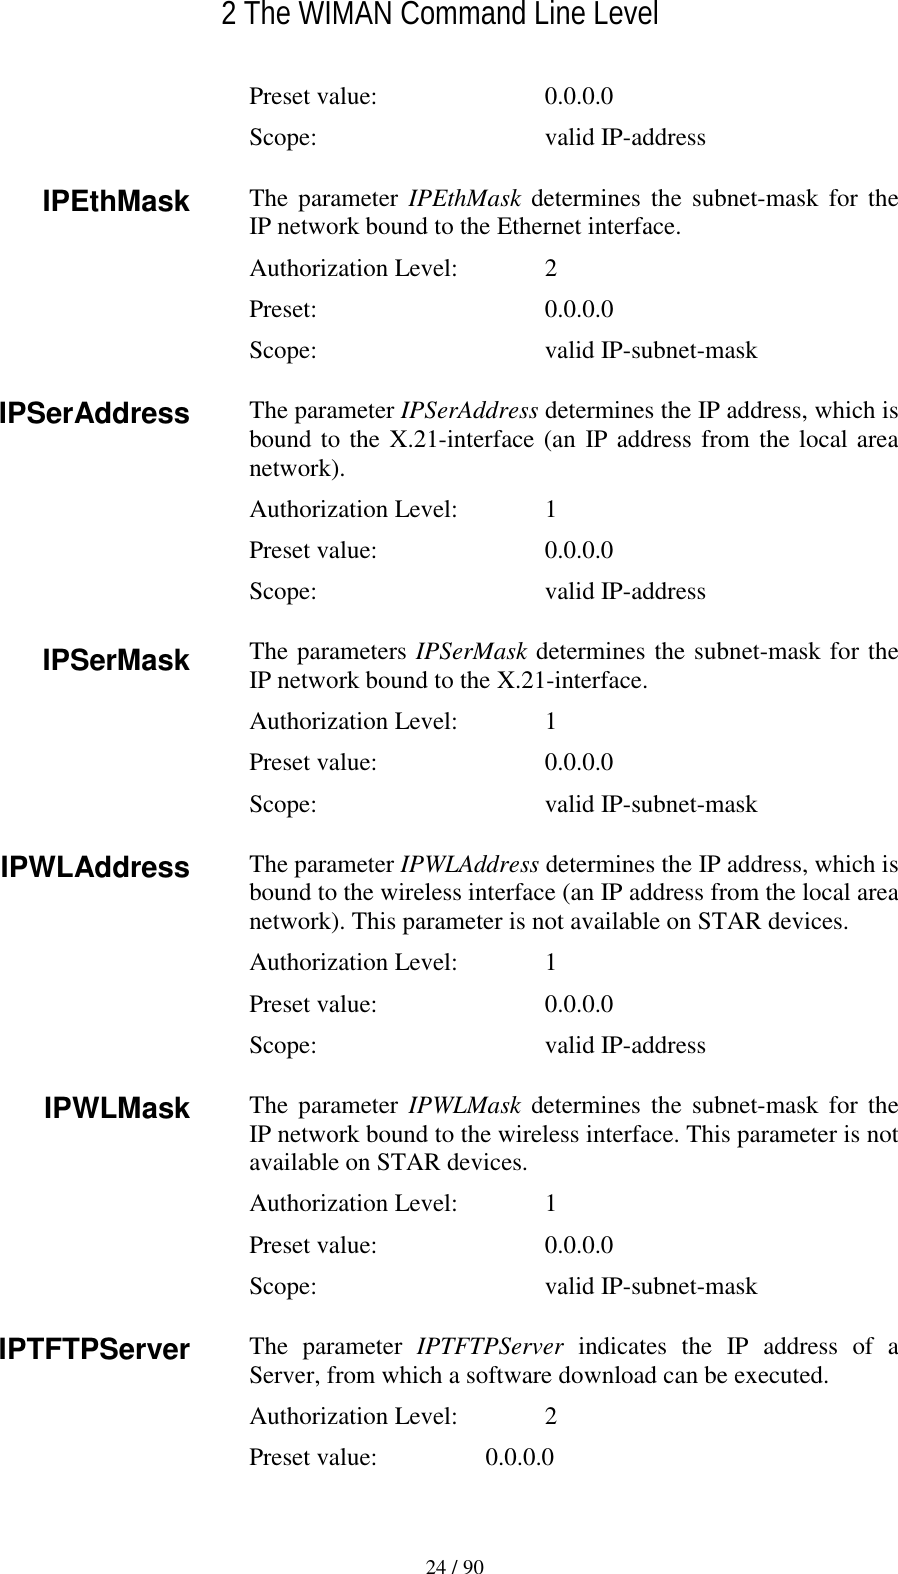   2 The WIMAN Command Line Level 24 / 90 Preset value:    0.0.0.0 Scope:  valid IP-address The parameter IPEthMask determines the subnet-mask for the IP network bound to the Ethernet interface. Authorization Level:    2 Preset:  0.0.0.0 Scope:  valid IP-subnet-mask The parameter IPSerAddress determines the IP address, which is bound to the X.21-interface (an IP address from the local area network). Authorization Level:    1 Preset value:    0.0.0.0 Scope:  valid IP-address The parameters IPSerMask determines the subnet-mask for the IP network bound to the X.21-interface. Authorization Level:    1 Preset value:    0.0.0.0 Scope:  valid IP-subnet-mask The parameter IPWLAddress determines the IP address, which is bound to the wireless interface (an IP address from the local area network). This parameter is not available on STAR devices. Authorization Level:    1 Preset value:    0.0.0.0 Scope:  valid IP-address The parameter IPWLMask determines the subnet-mask for the IP network bound to the wireless interface. This parameter is not available on STAR devices. Authorization Level:    1 Preset value:    0.0.0.0 Scope:  valid IP-subnet-mask The parameter IPTFTPServer indicates the IP address of a Server, from which a software download can be executed. Authorization Level:    2 Preset value:  0.0.0.0 IPEthMask IPSerAddress IPSerMask IPWLAddress IPWLMask IPTFTPServer 